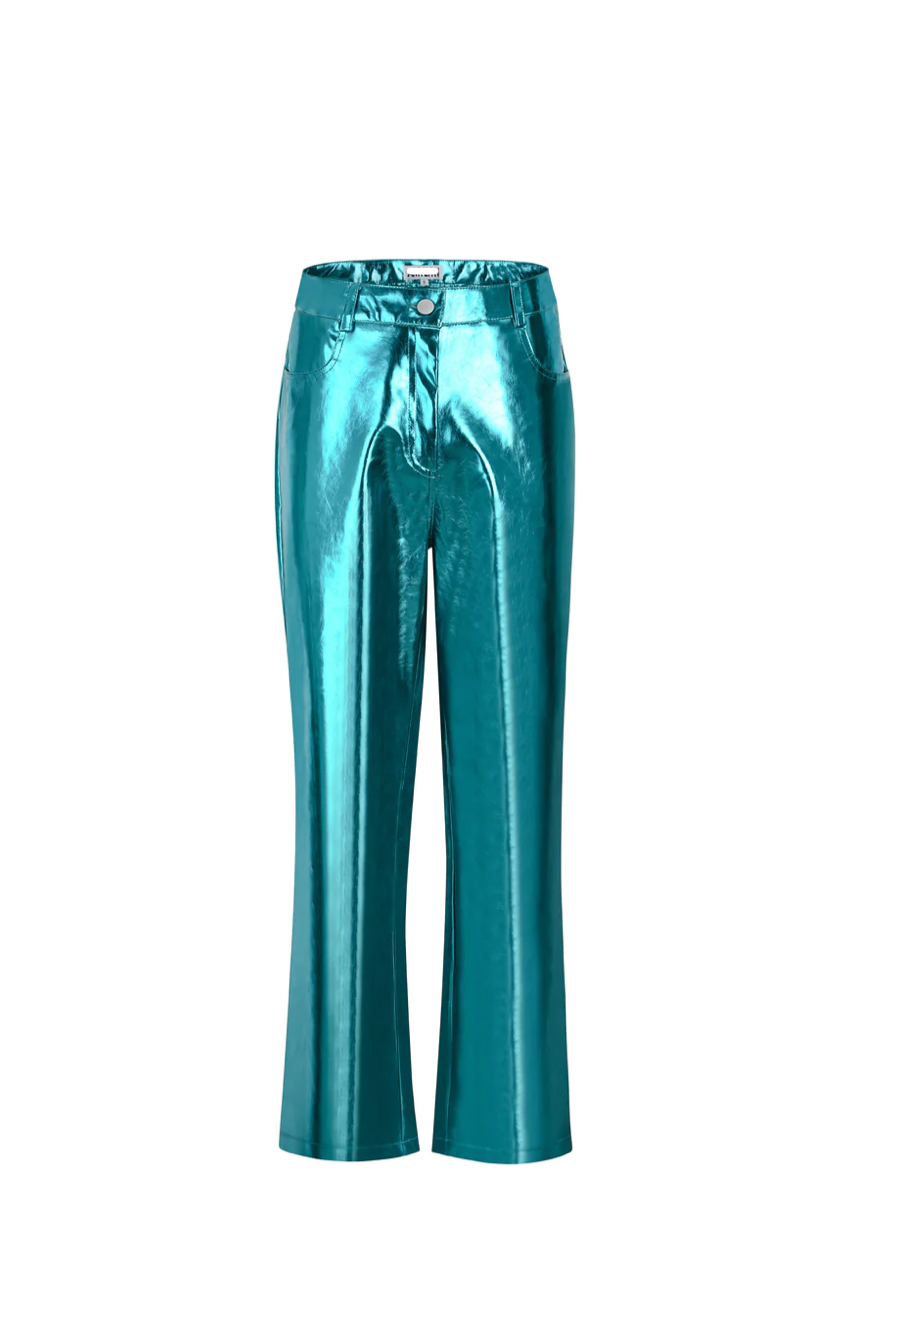 Meet Me At The Rave Shimmer pants (Festival) (BLUE) - Style Baby OMG Fashion Boutique - Stylebabyomg - Buy - Aesthetic Baddie Outfits - Babyboo - OOTD - Shie 